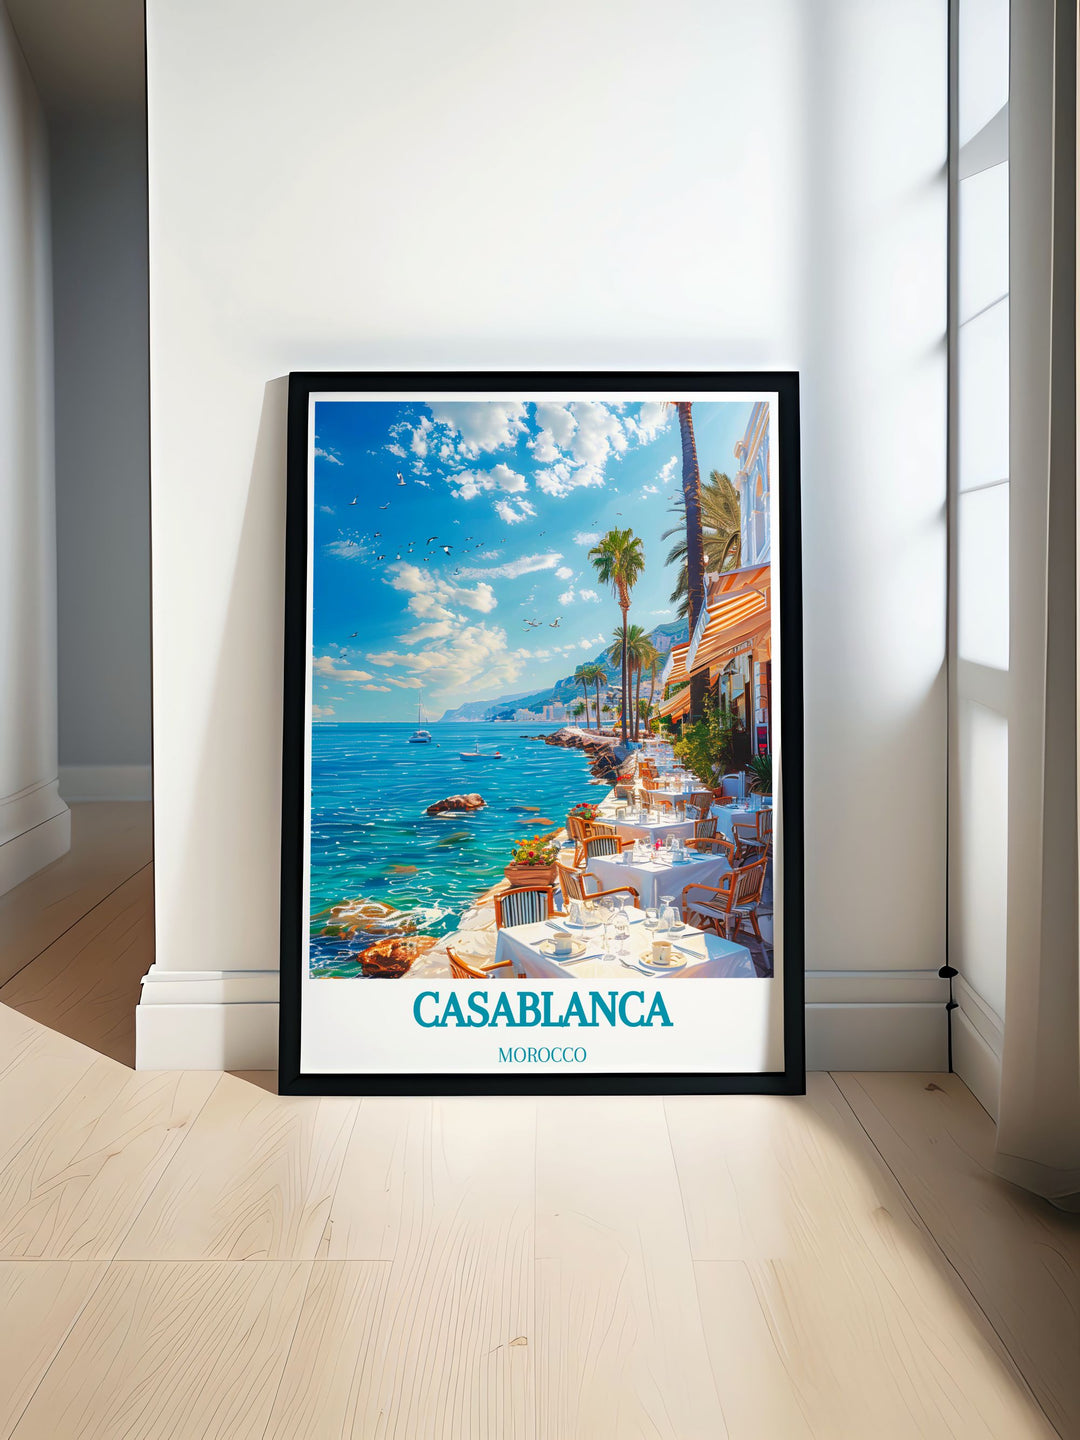 Showcasing Corniche Ain Diabs coastal beauty and Casablancas cultural vibrancy, this poster is ideal for art lovers who appreciate the diverse and stunning landscapes of Morocco.